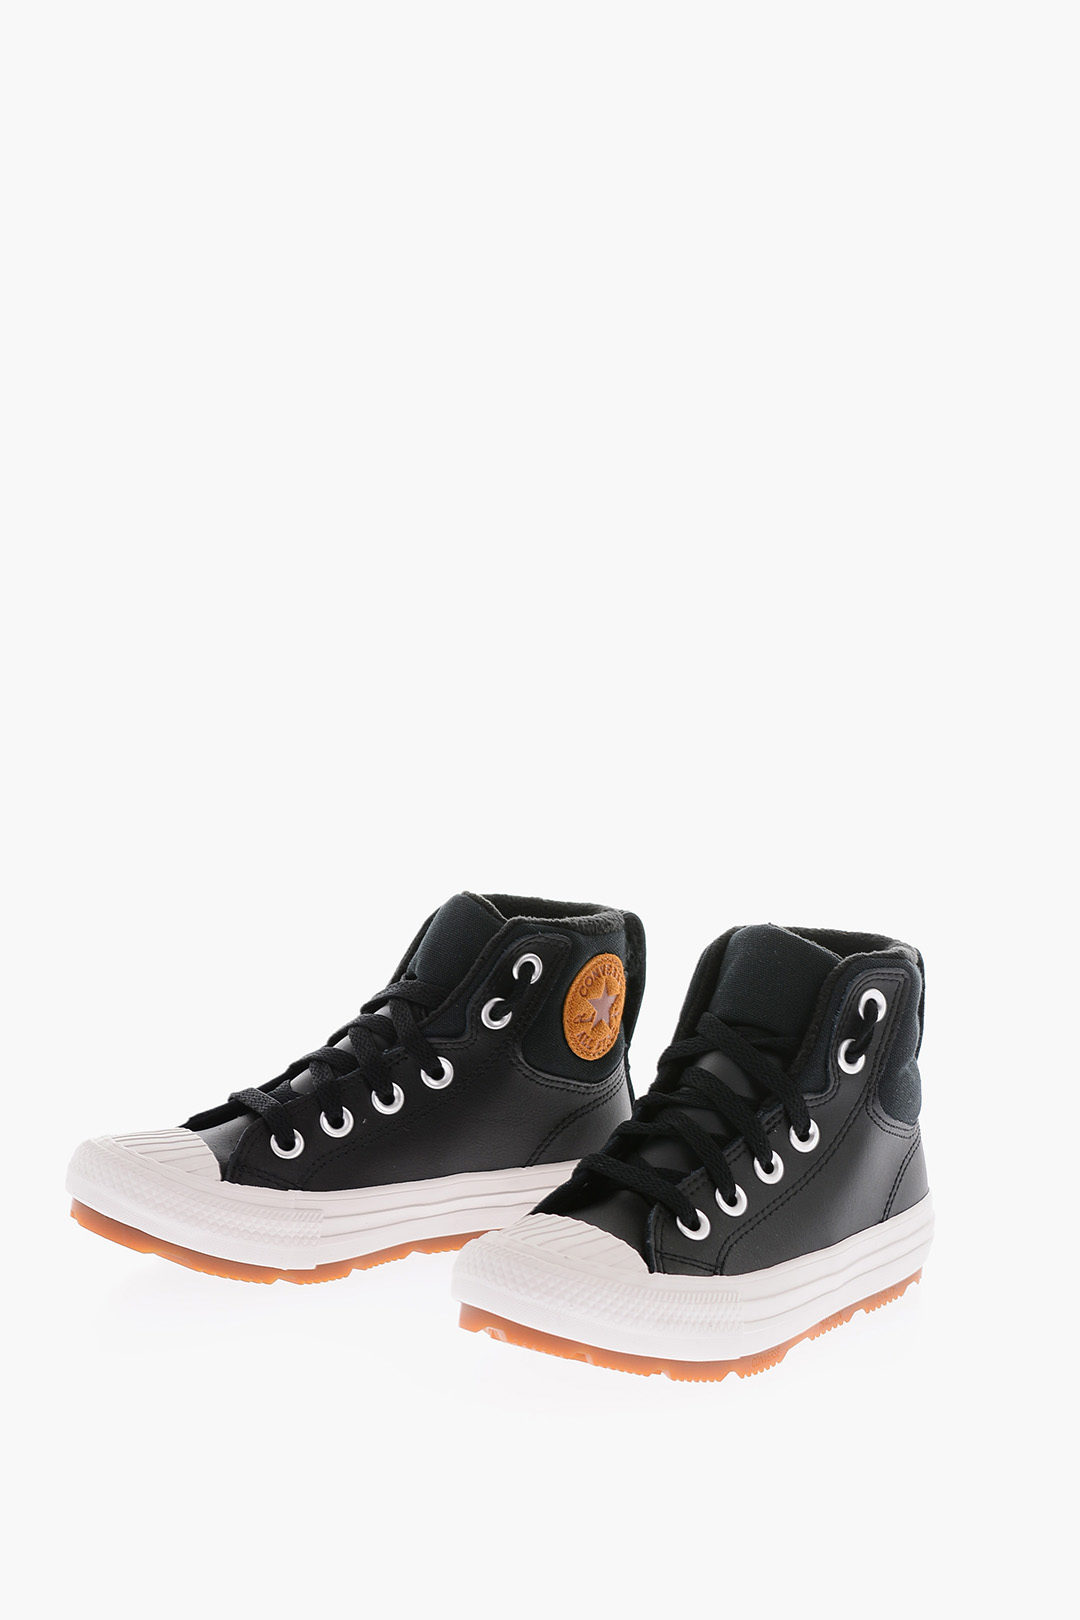 Converse KIDS ALL STAR CHUCK TAYLOR leather top sneakers with fabric detail unisex children boys girls - Glamood Outlet